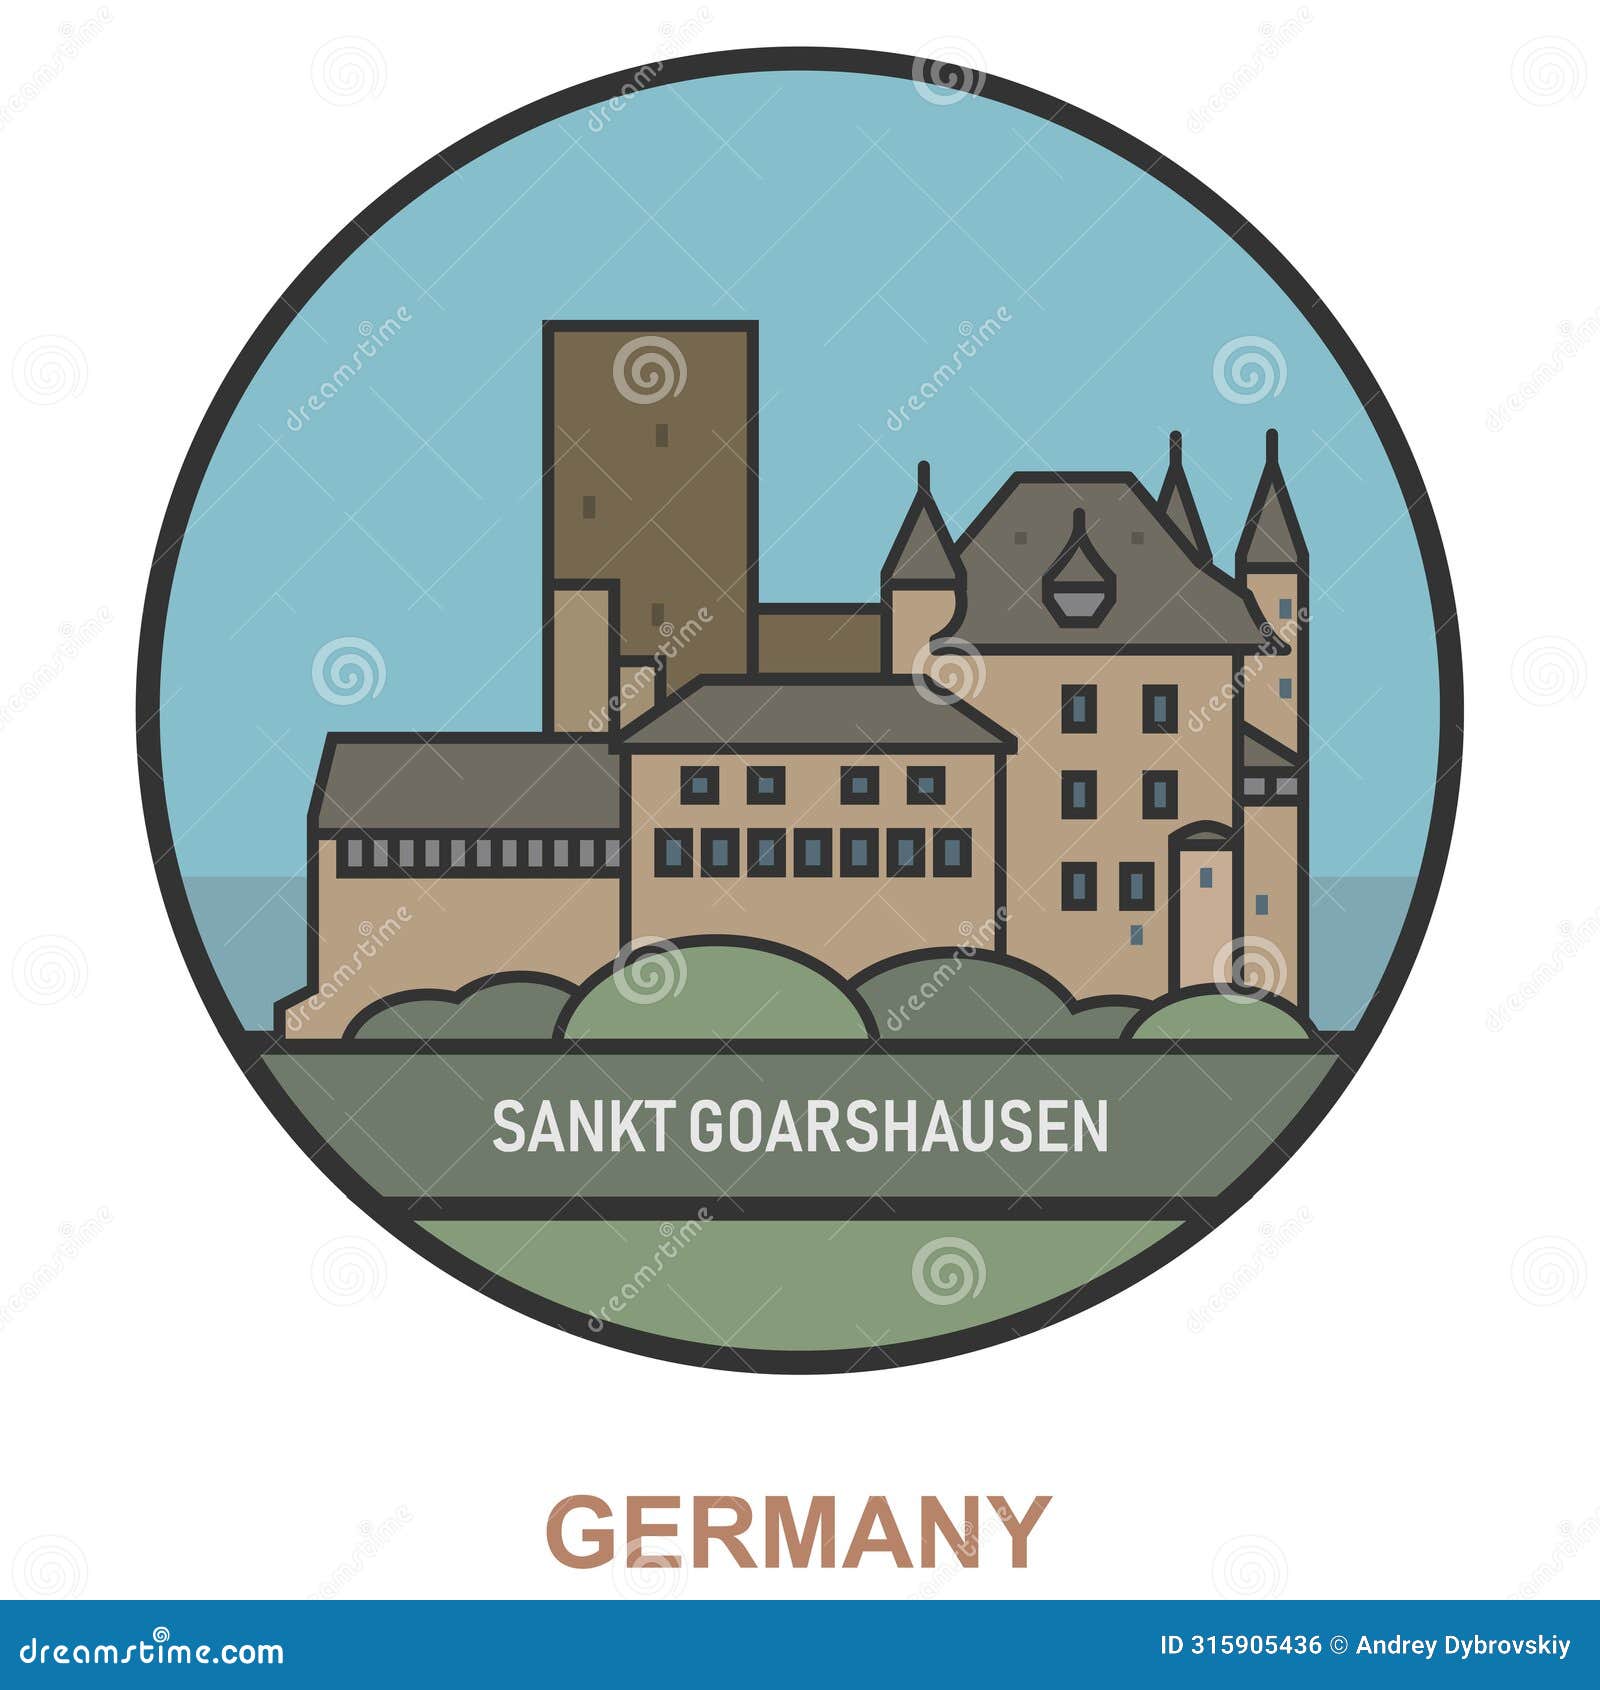 sankt goarshausen. cities and towns in germany